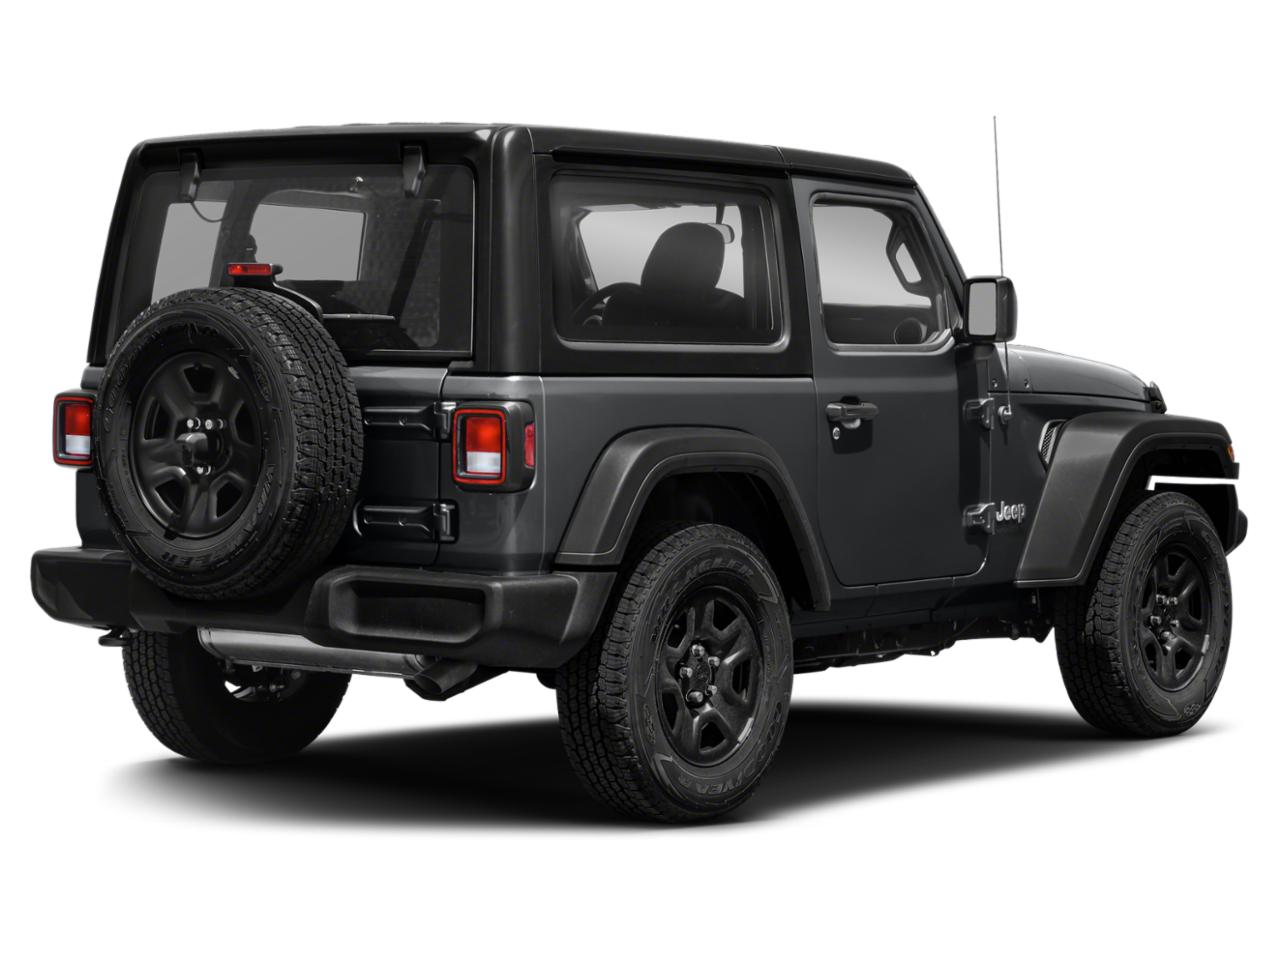 2020 Jeep Wrangler lease $909 Mo $0 Down Leases Available